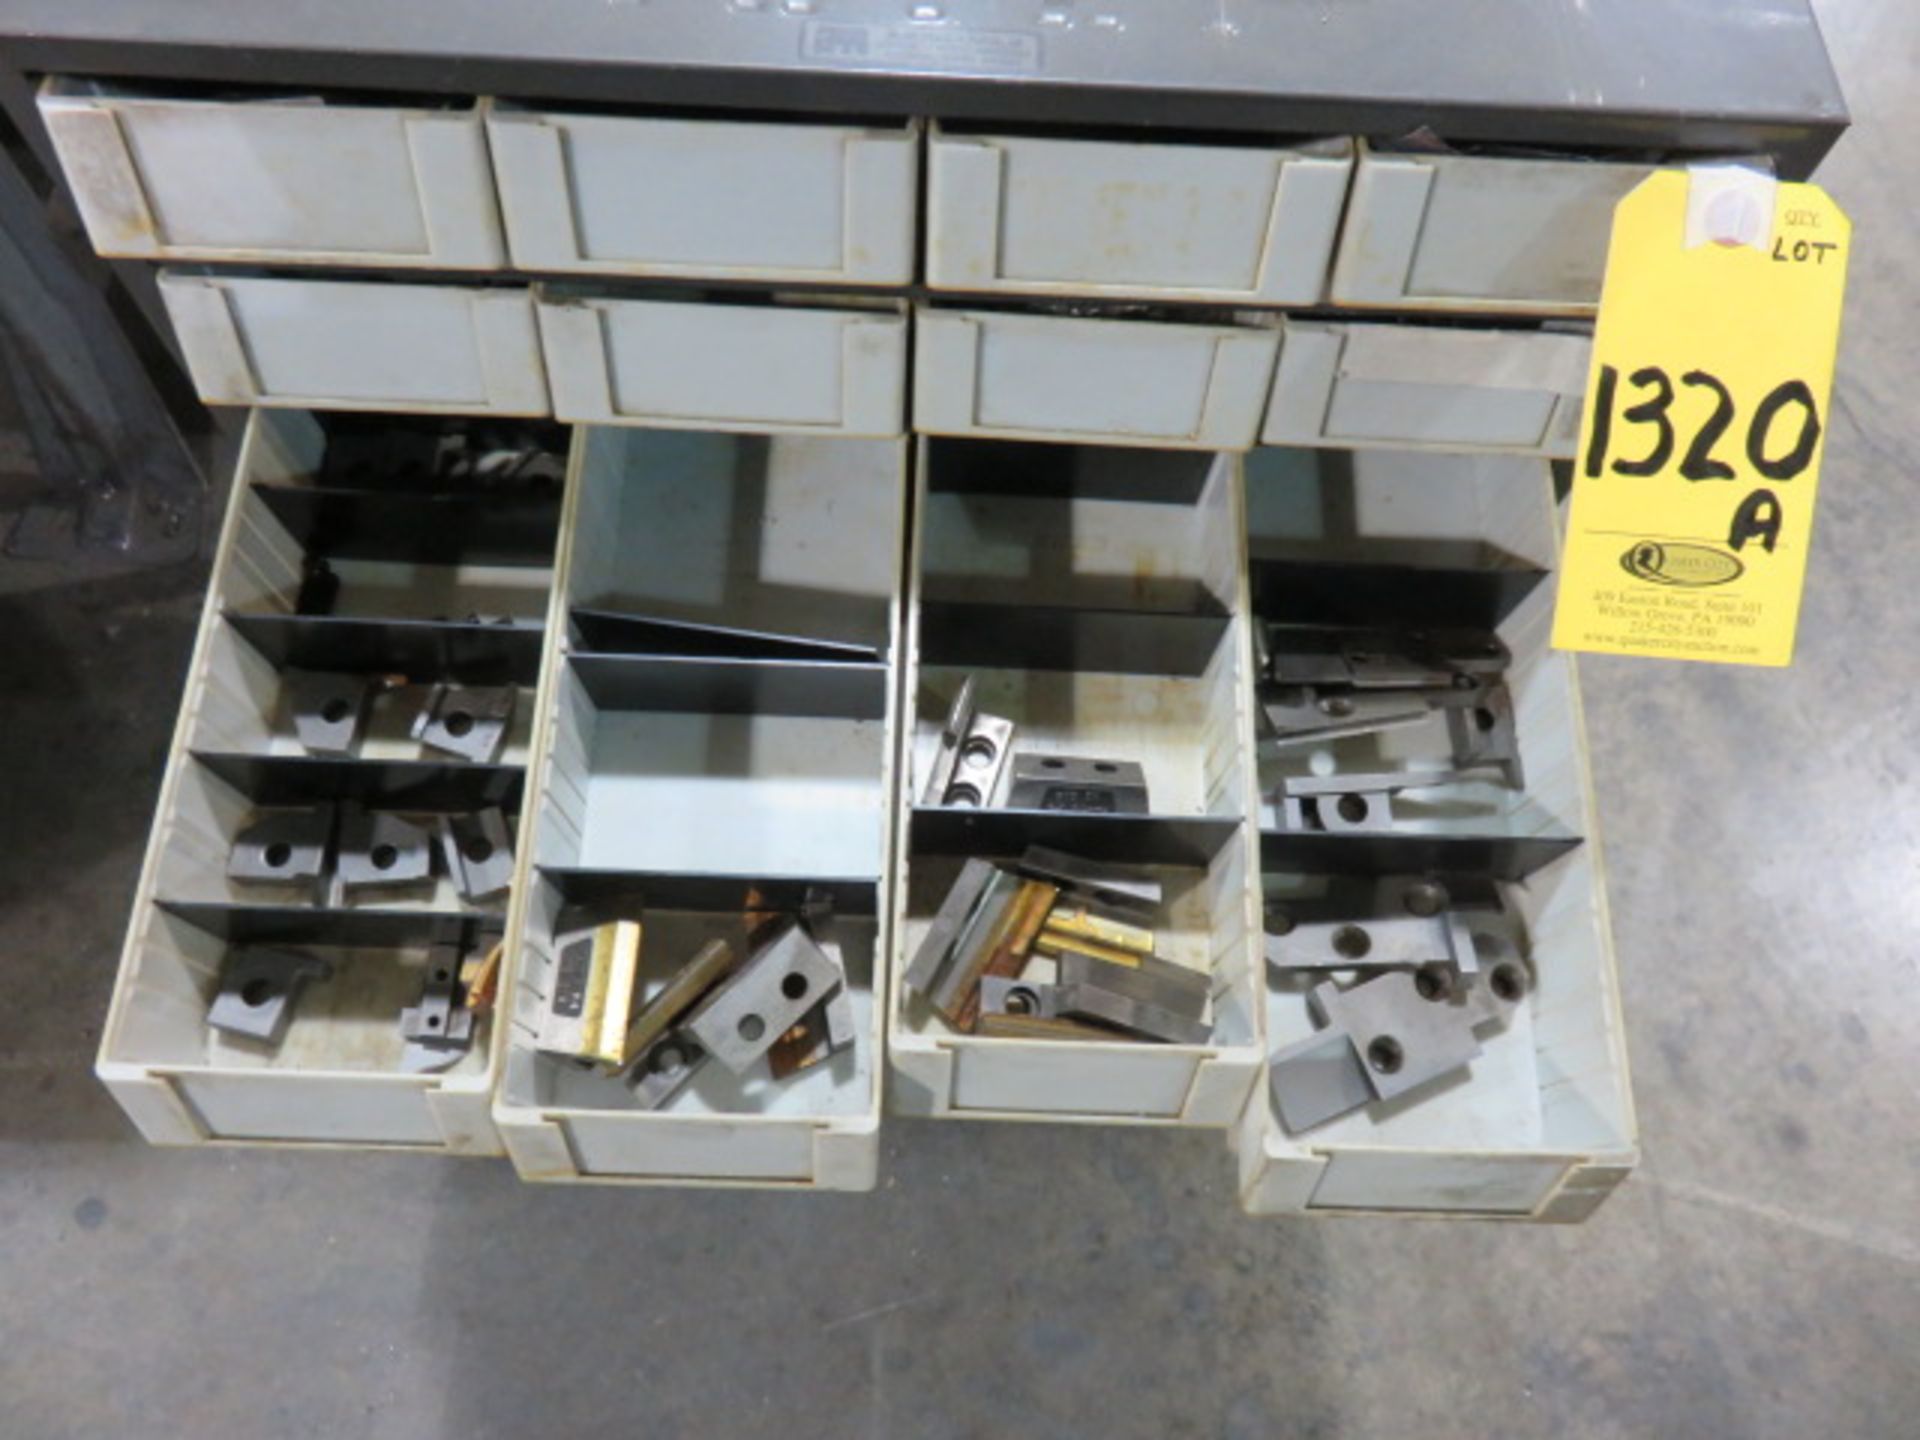 CUT-OFF BLADES FOR LATHE TOOLS W/ CABINET-FITS IN LOTS 1313,1314,1320 - Image 4 of 5